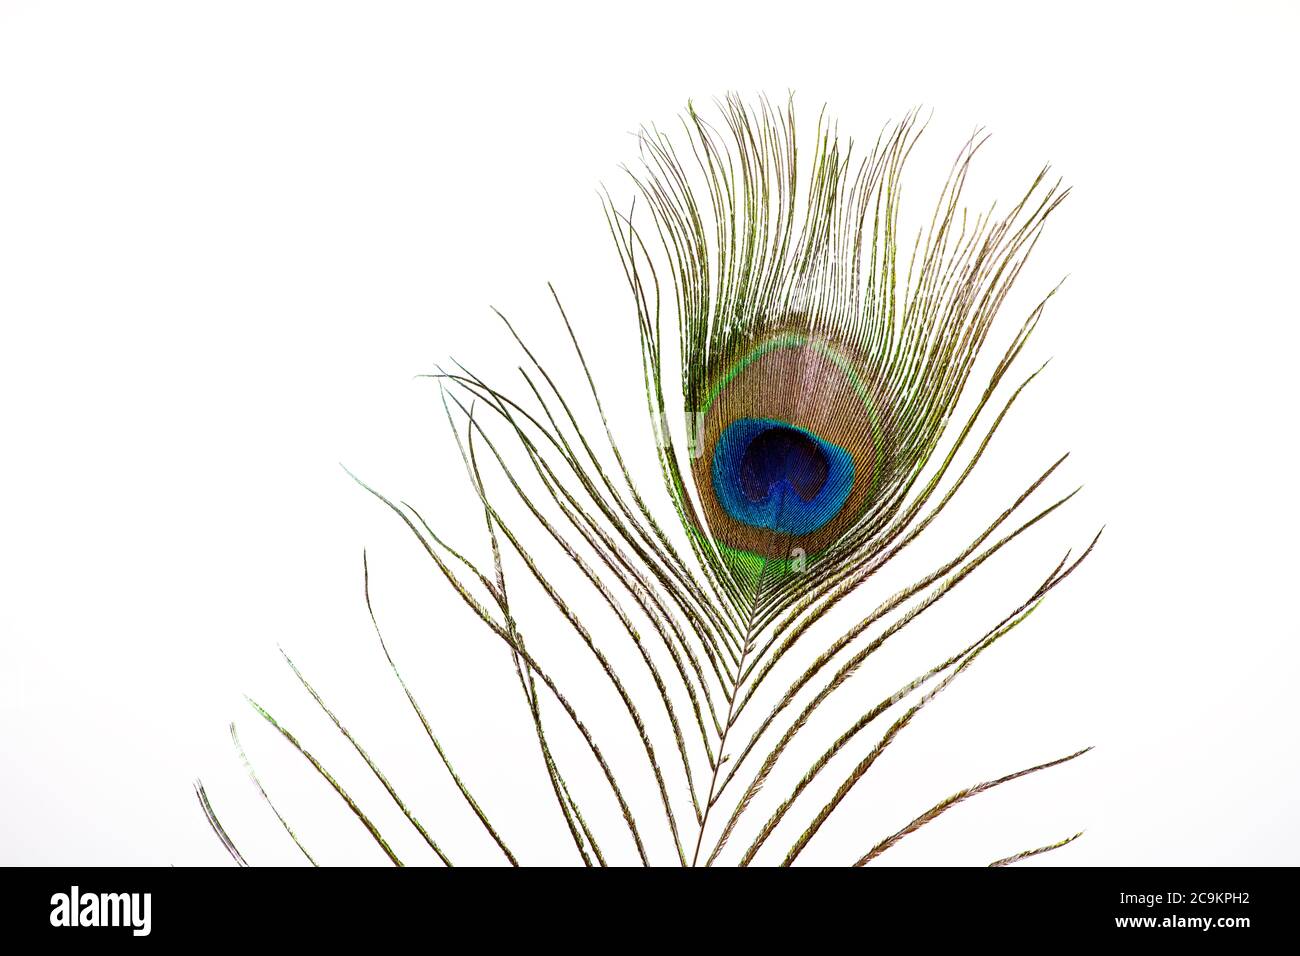 Close up of a feather from a Peacock photographed against a white background Stock Photo